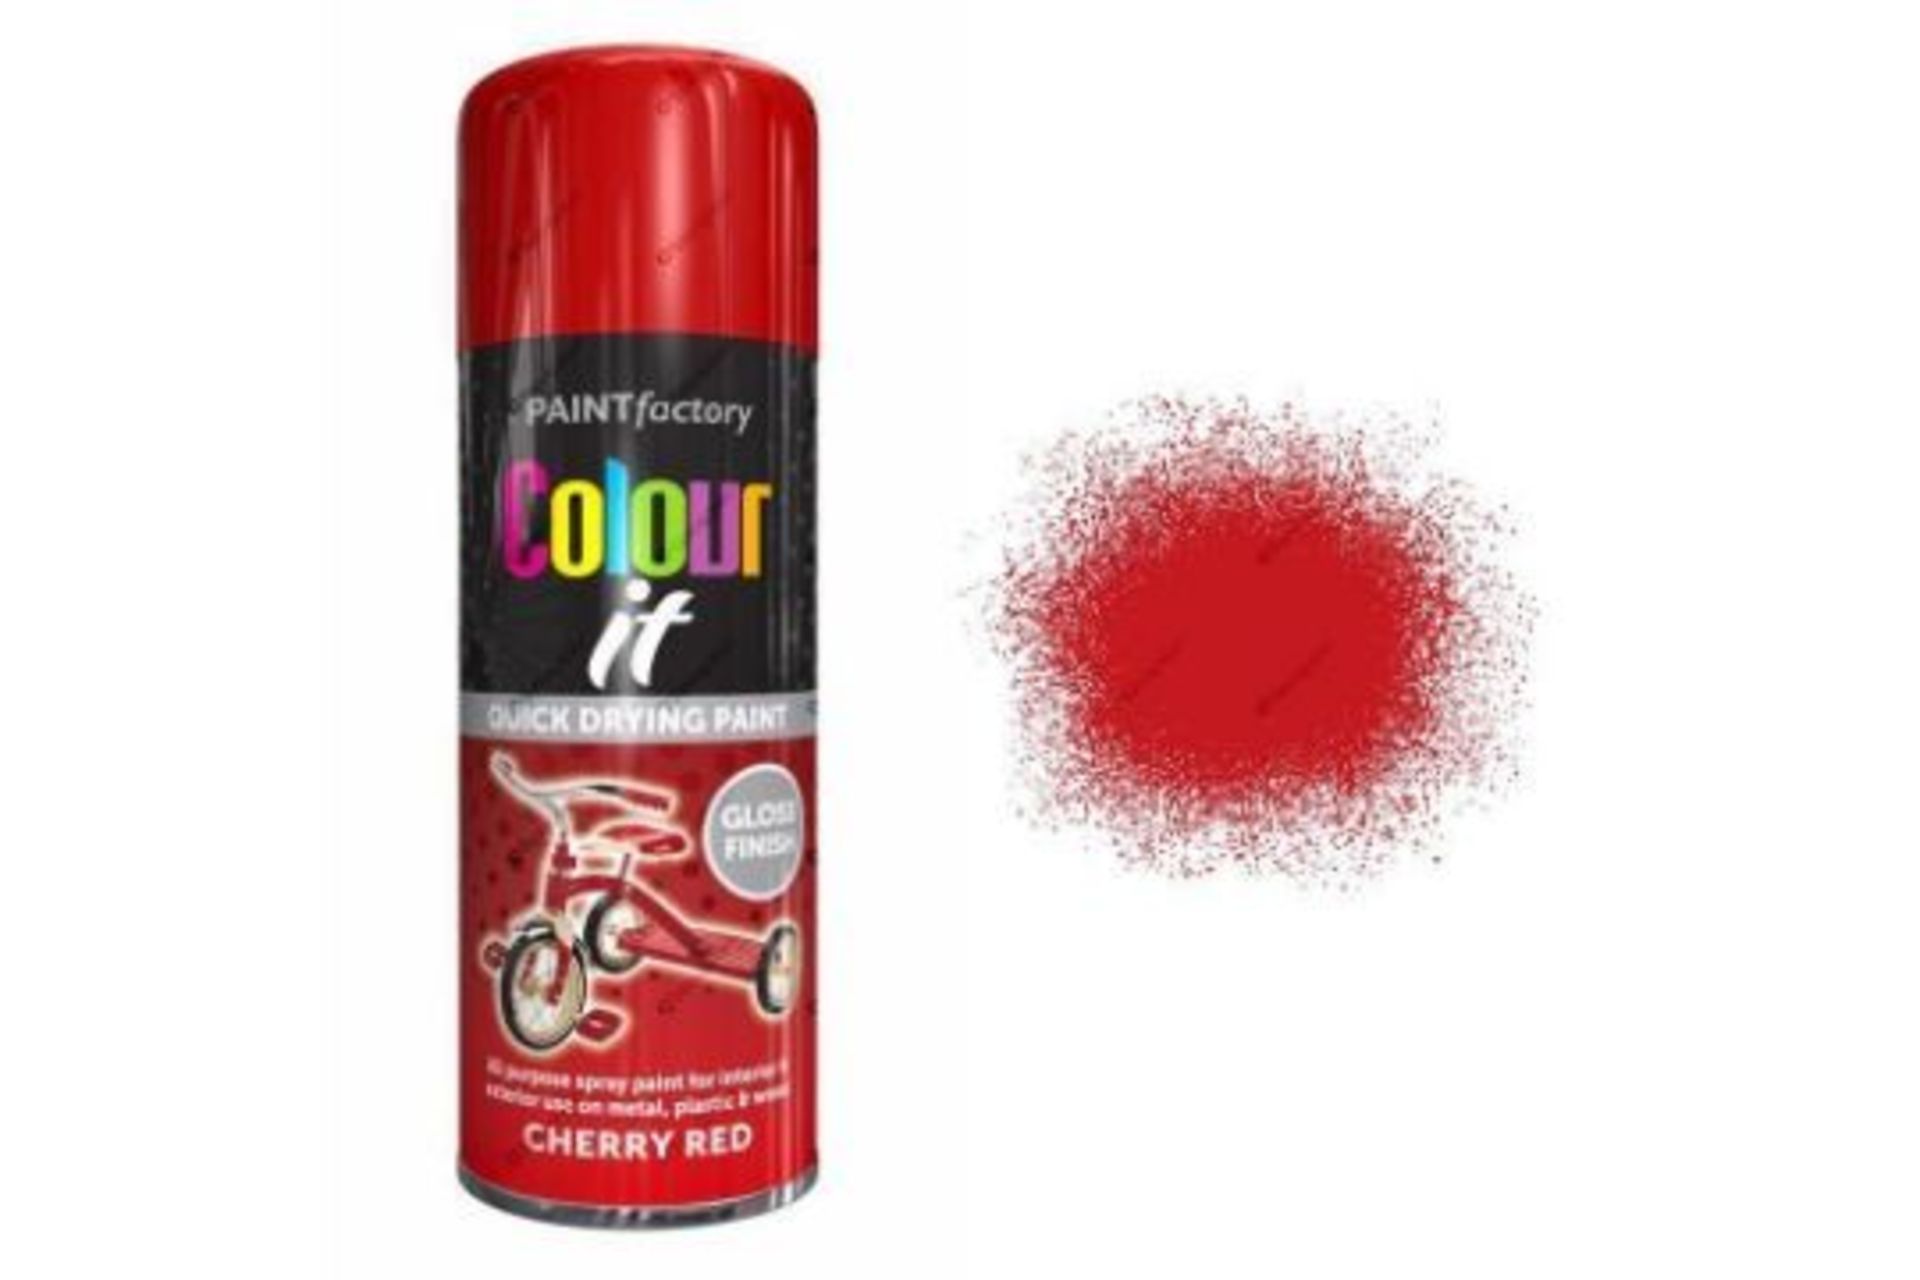 X2 BRAND NEW 400ML CANS OF COLOUT IT CHERRY RED GLOSS FINISH SPRAY PAINT